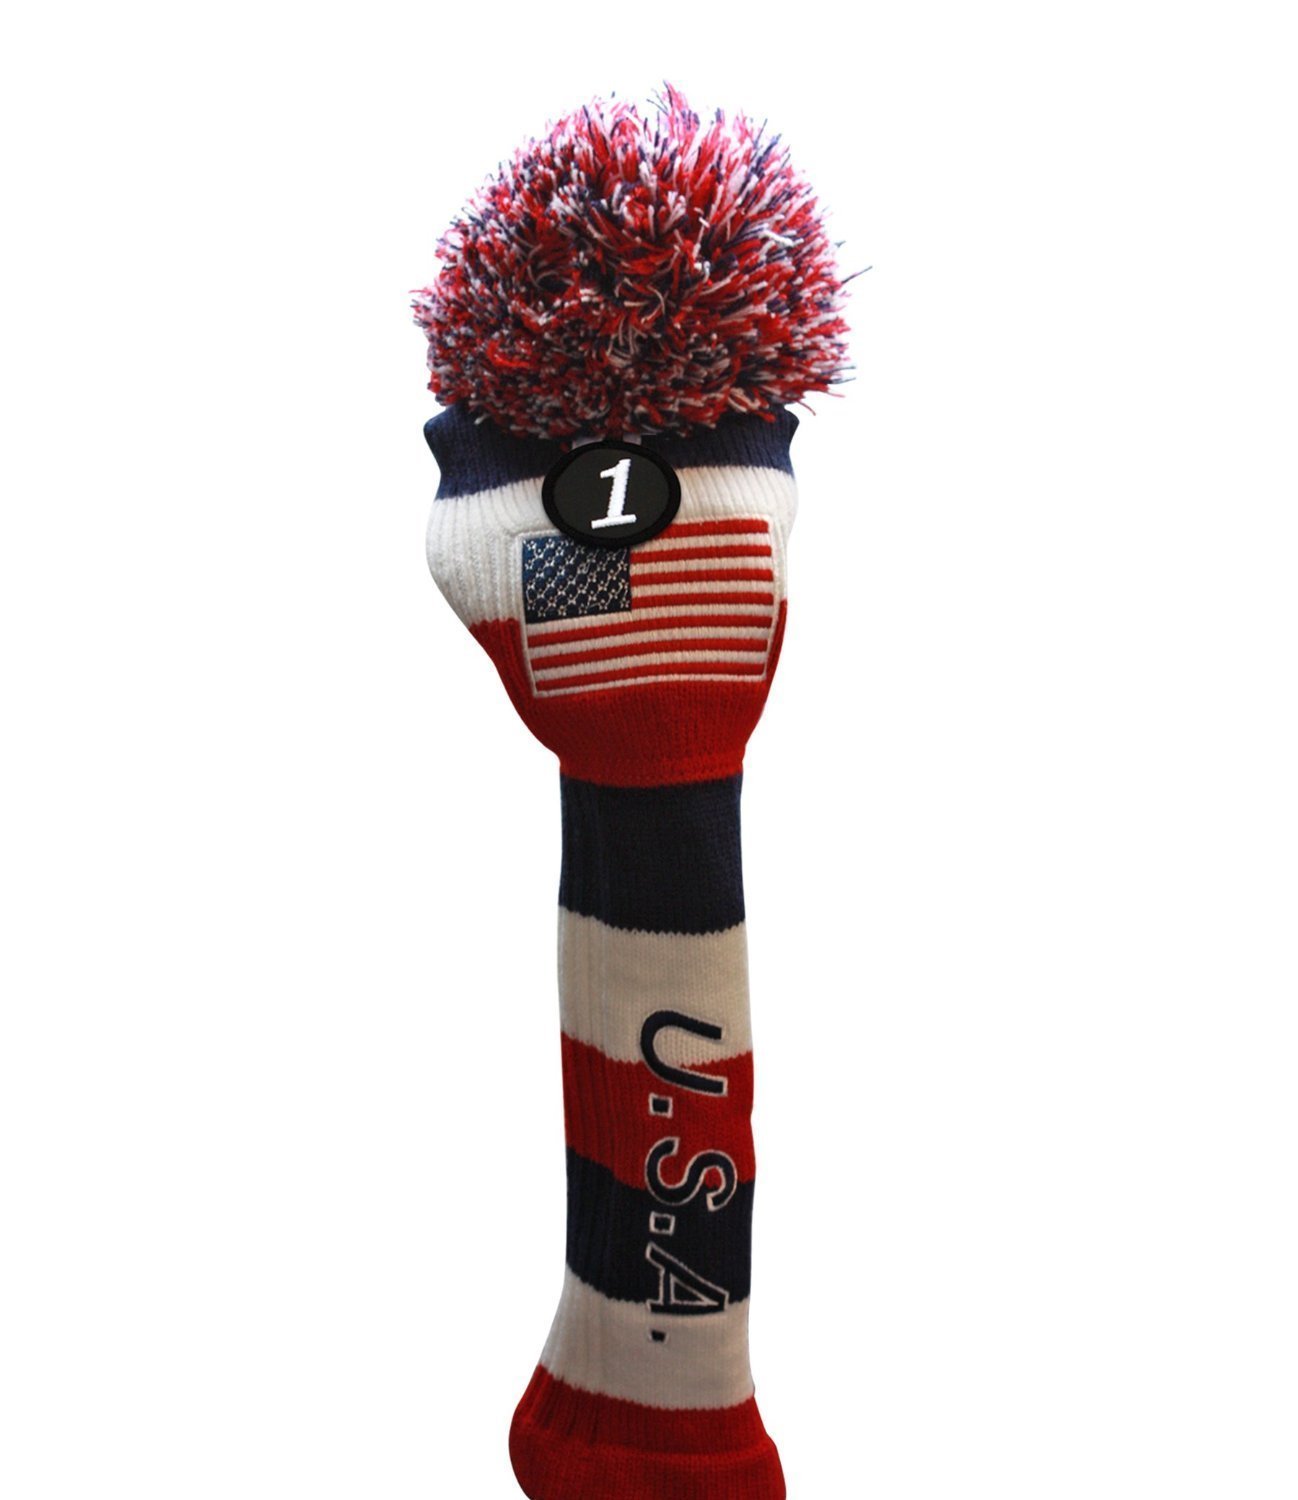 USA Majek Golf Driver 1 3 5 7 9 Fairway Woods Headcovers Pom Pom Knit Limited Edition Vintage Classic Traditional Flag Stars Red White Blue Stripes Retro Head Cover Fits 460cc Drivers and 260cc Woods - image 2 of 9